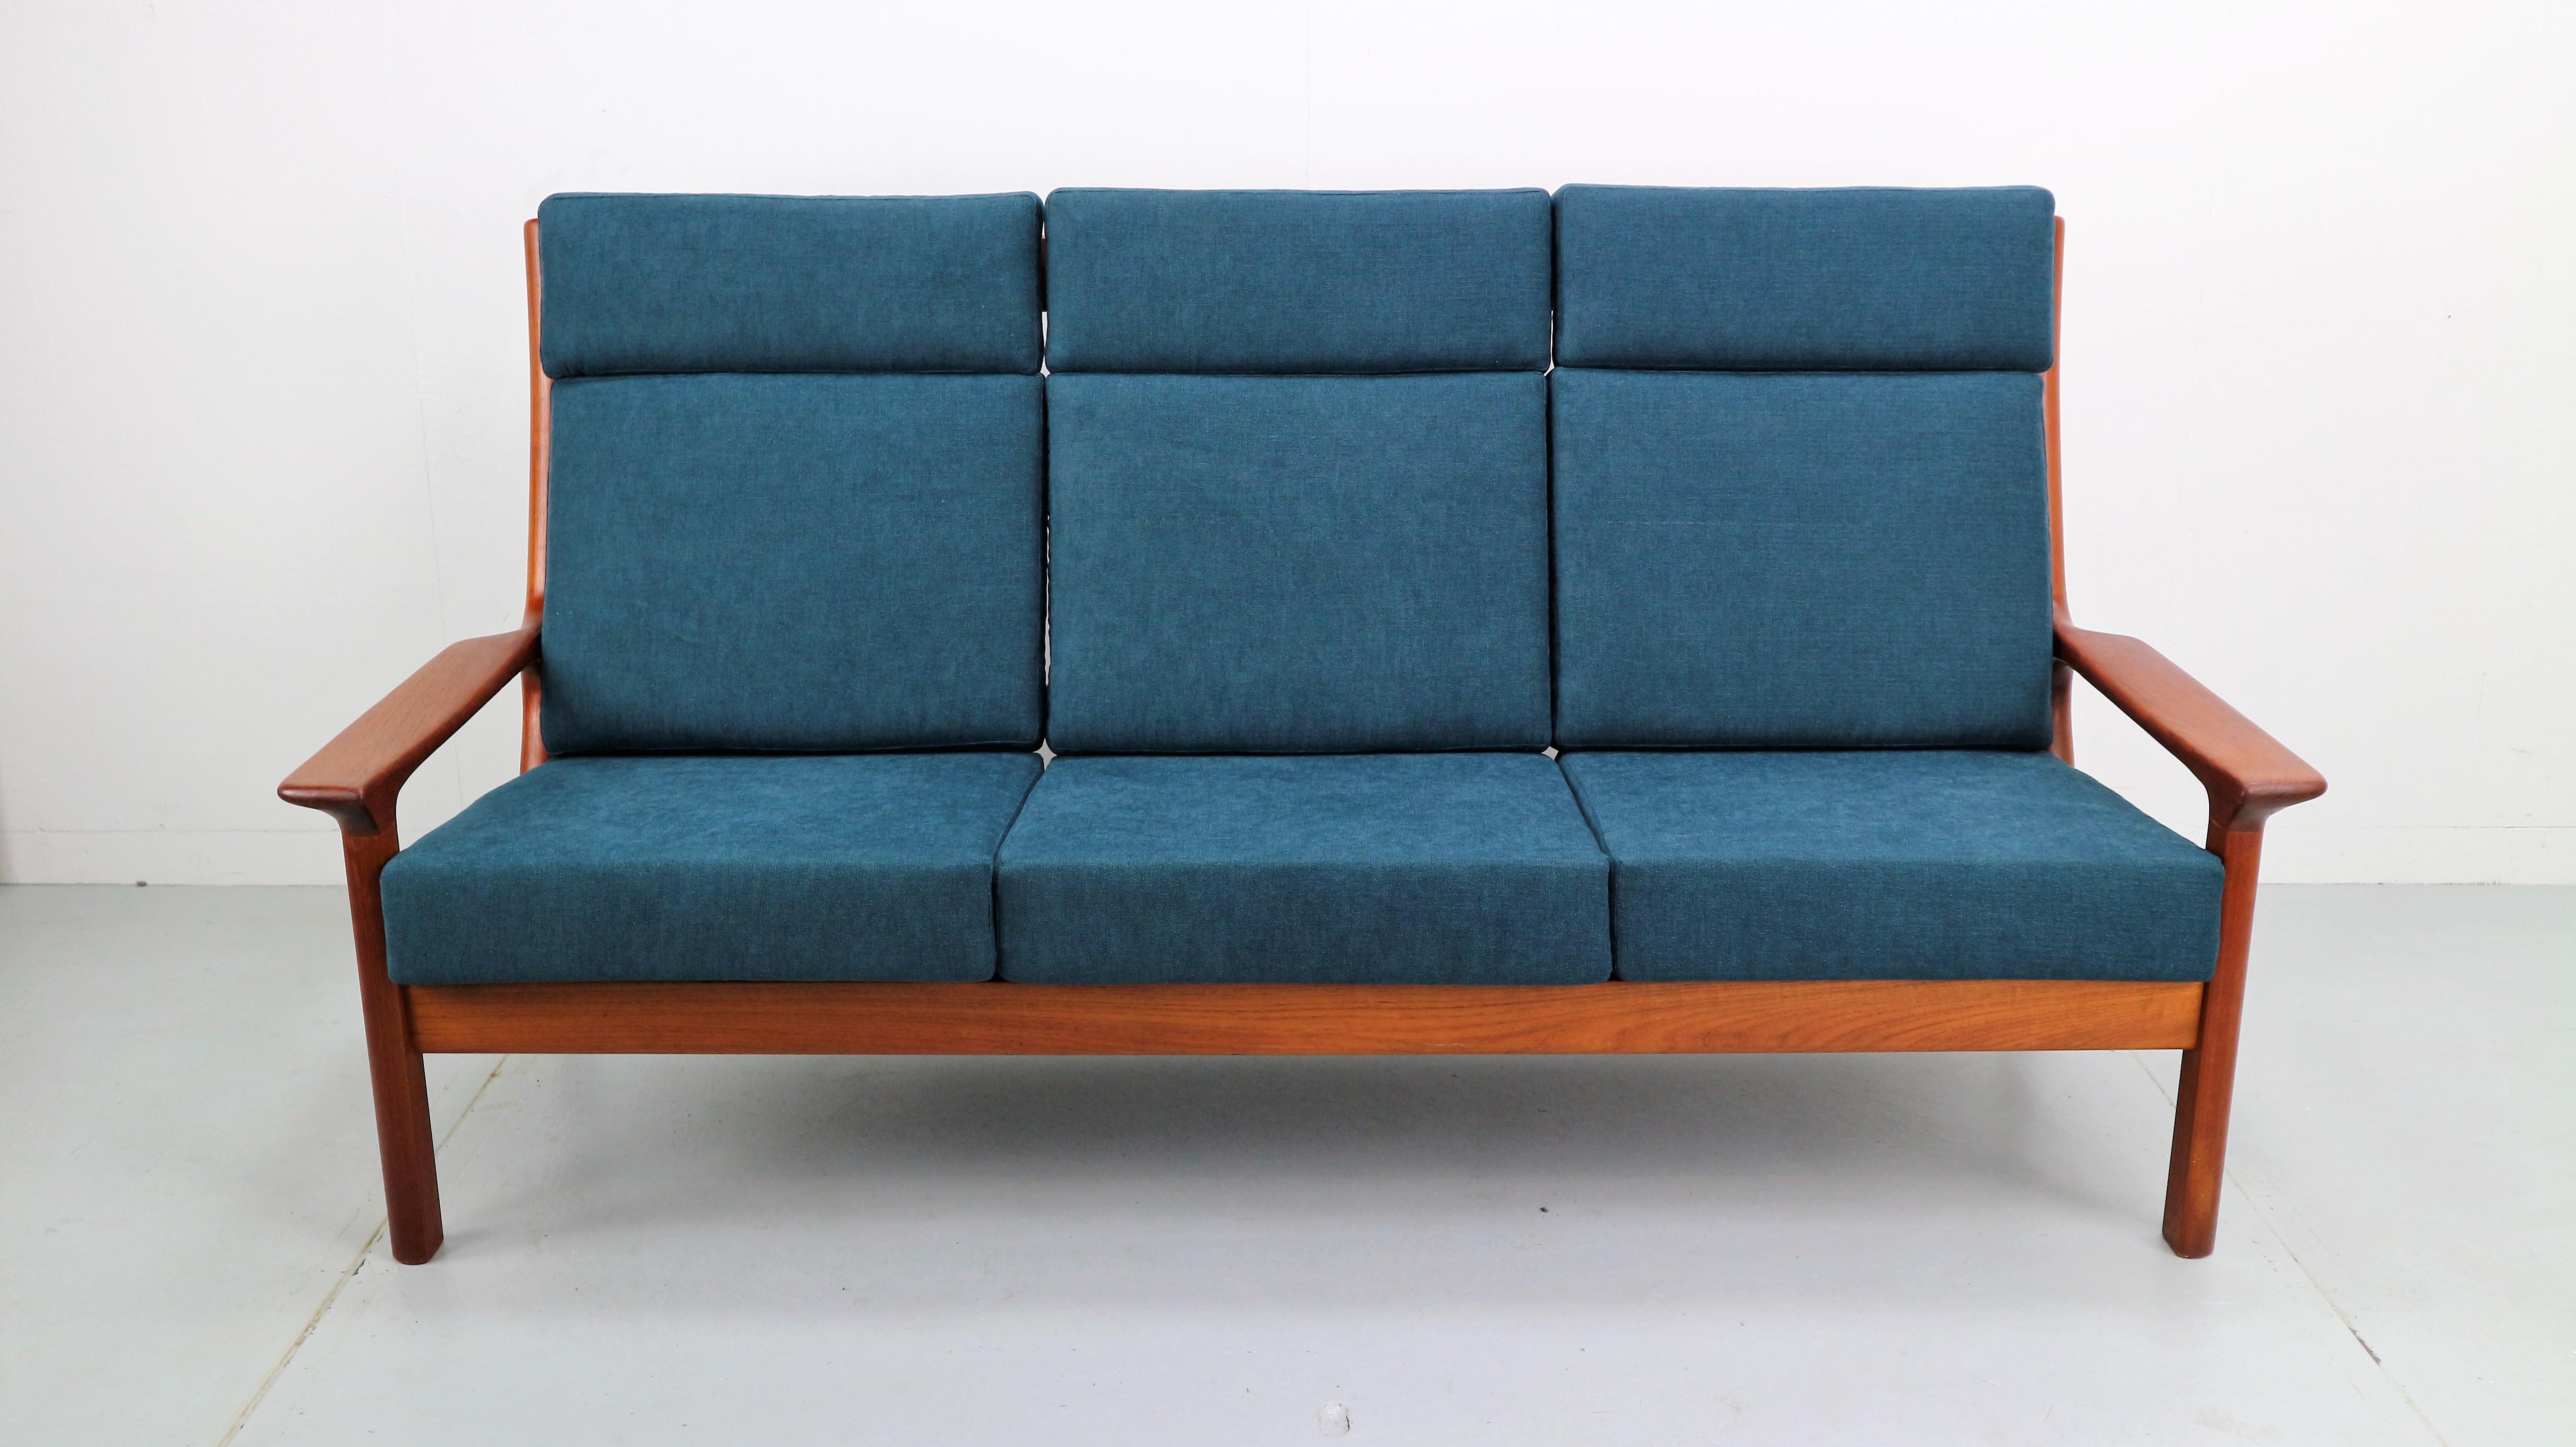 This 3-seat sofa in solid teak was designed by the Danish designer Juul Kristensen and manufactured by Glostrup in the 1960s. The new cushions are newly upholstered in dark blue marine and fitted with zips. This is the more rare high-back seater